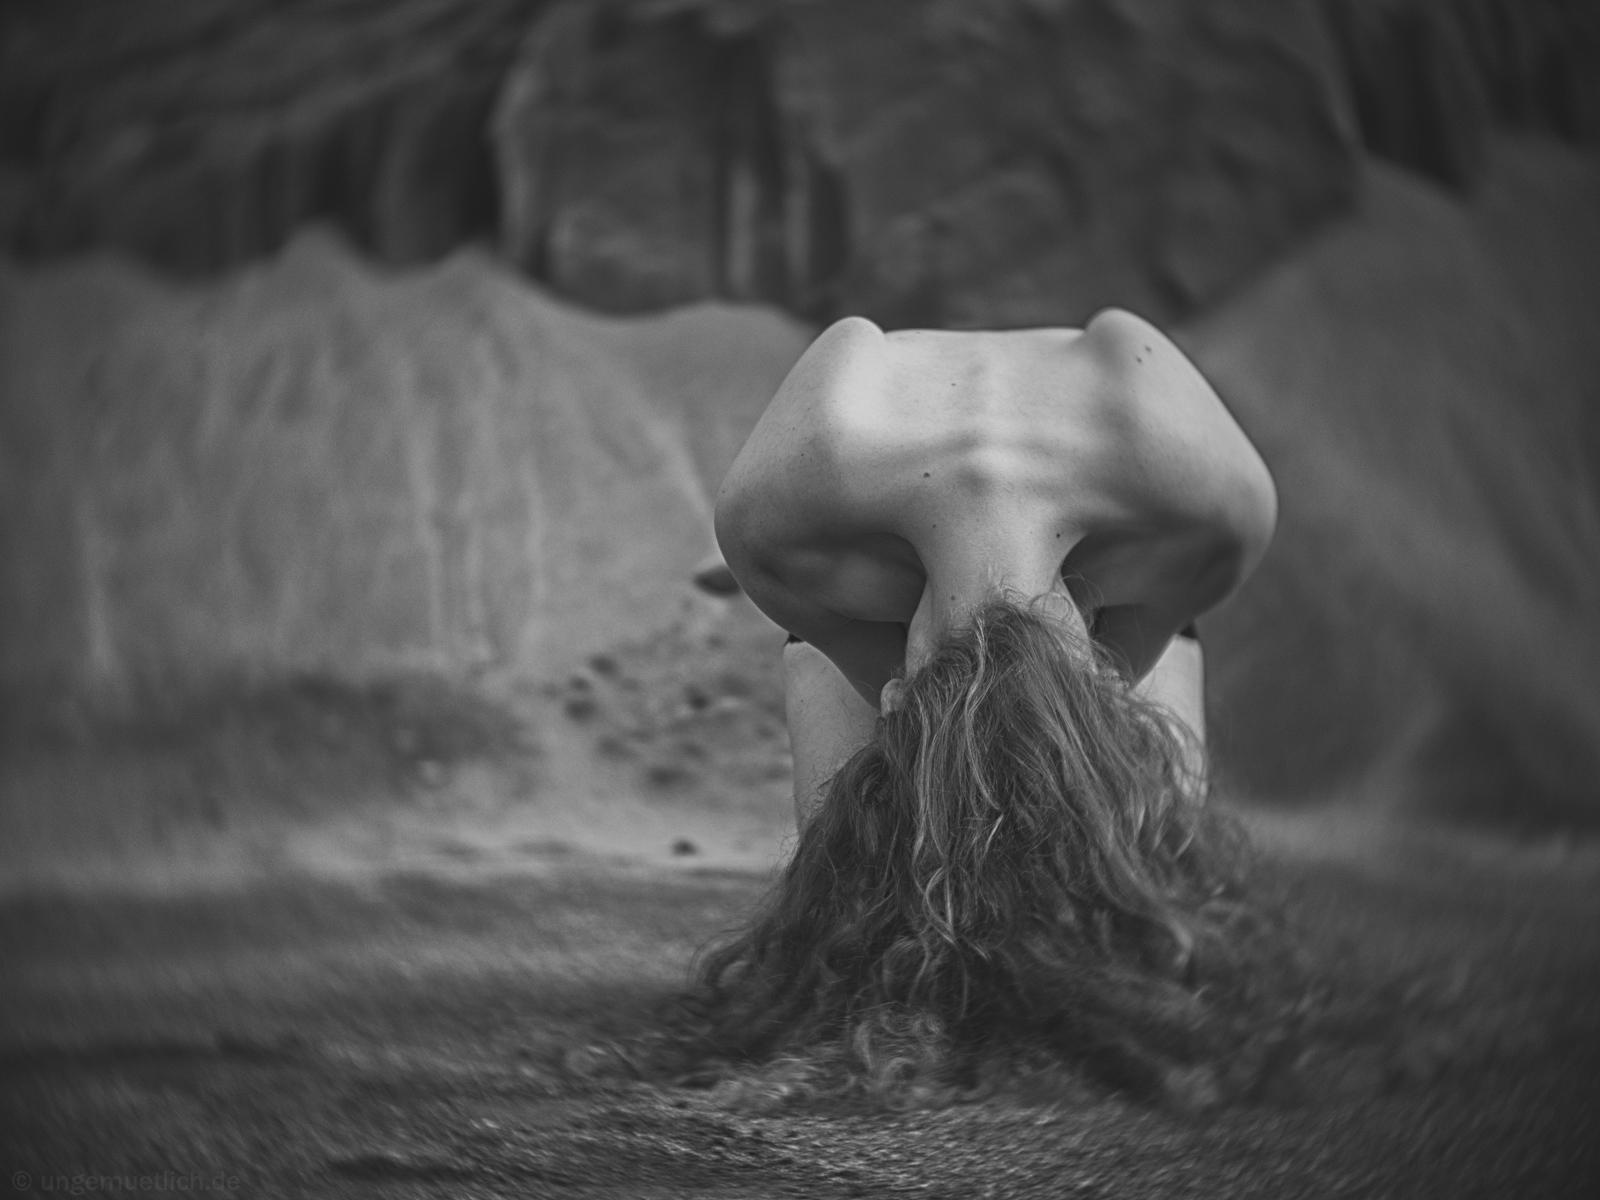 Wallpaper, portrait, abstract, rock, back, emotion, nude, girl